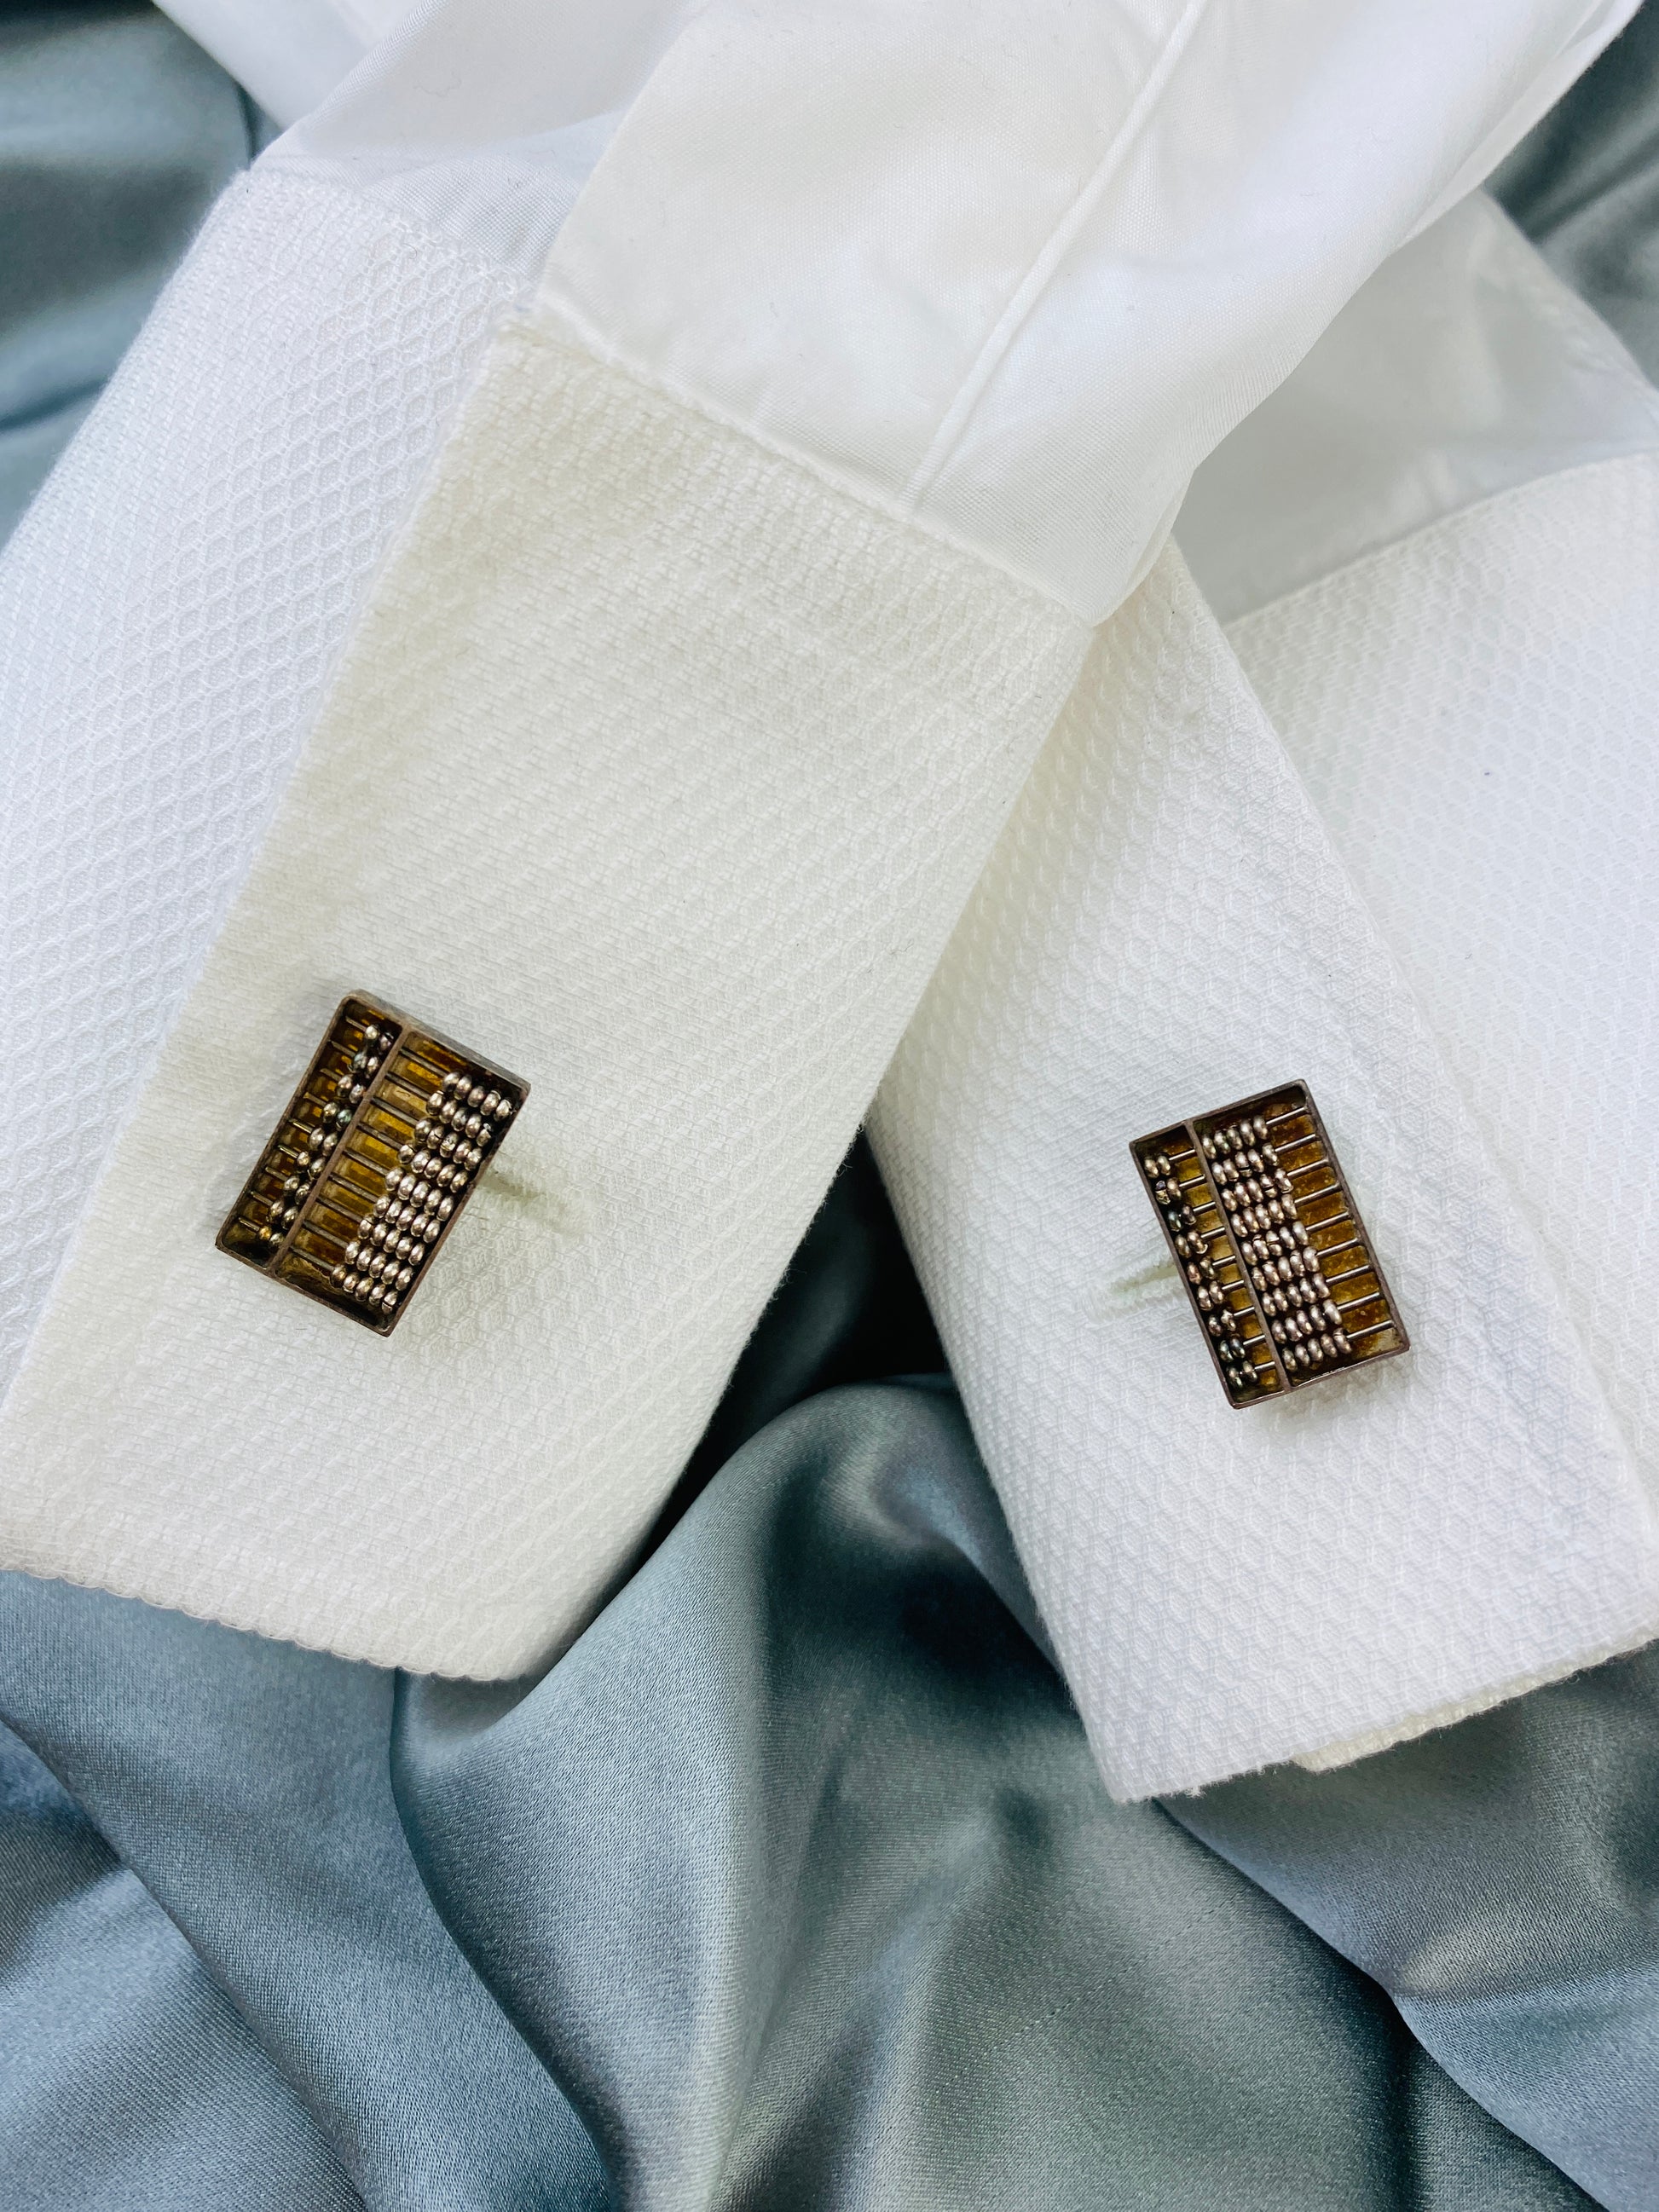 Vintage Working Abacus Silver Cufflinks and Tie Bar